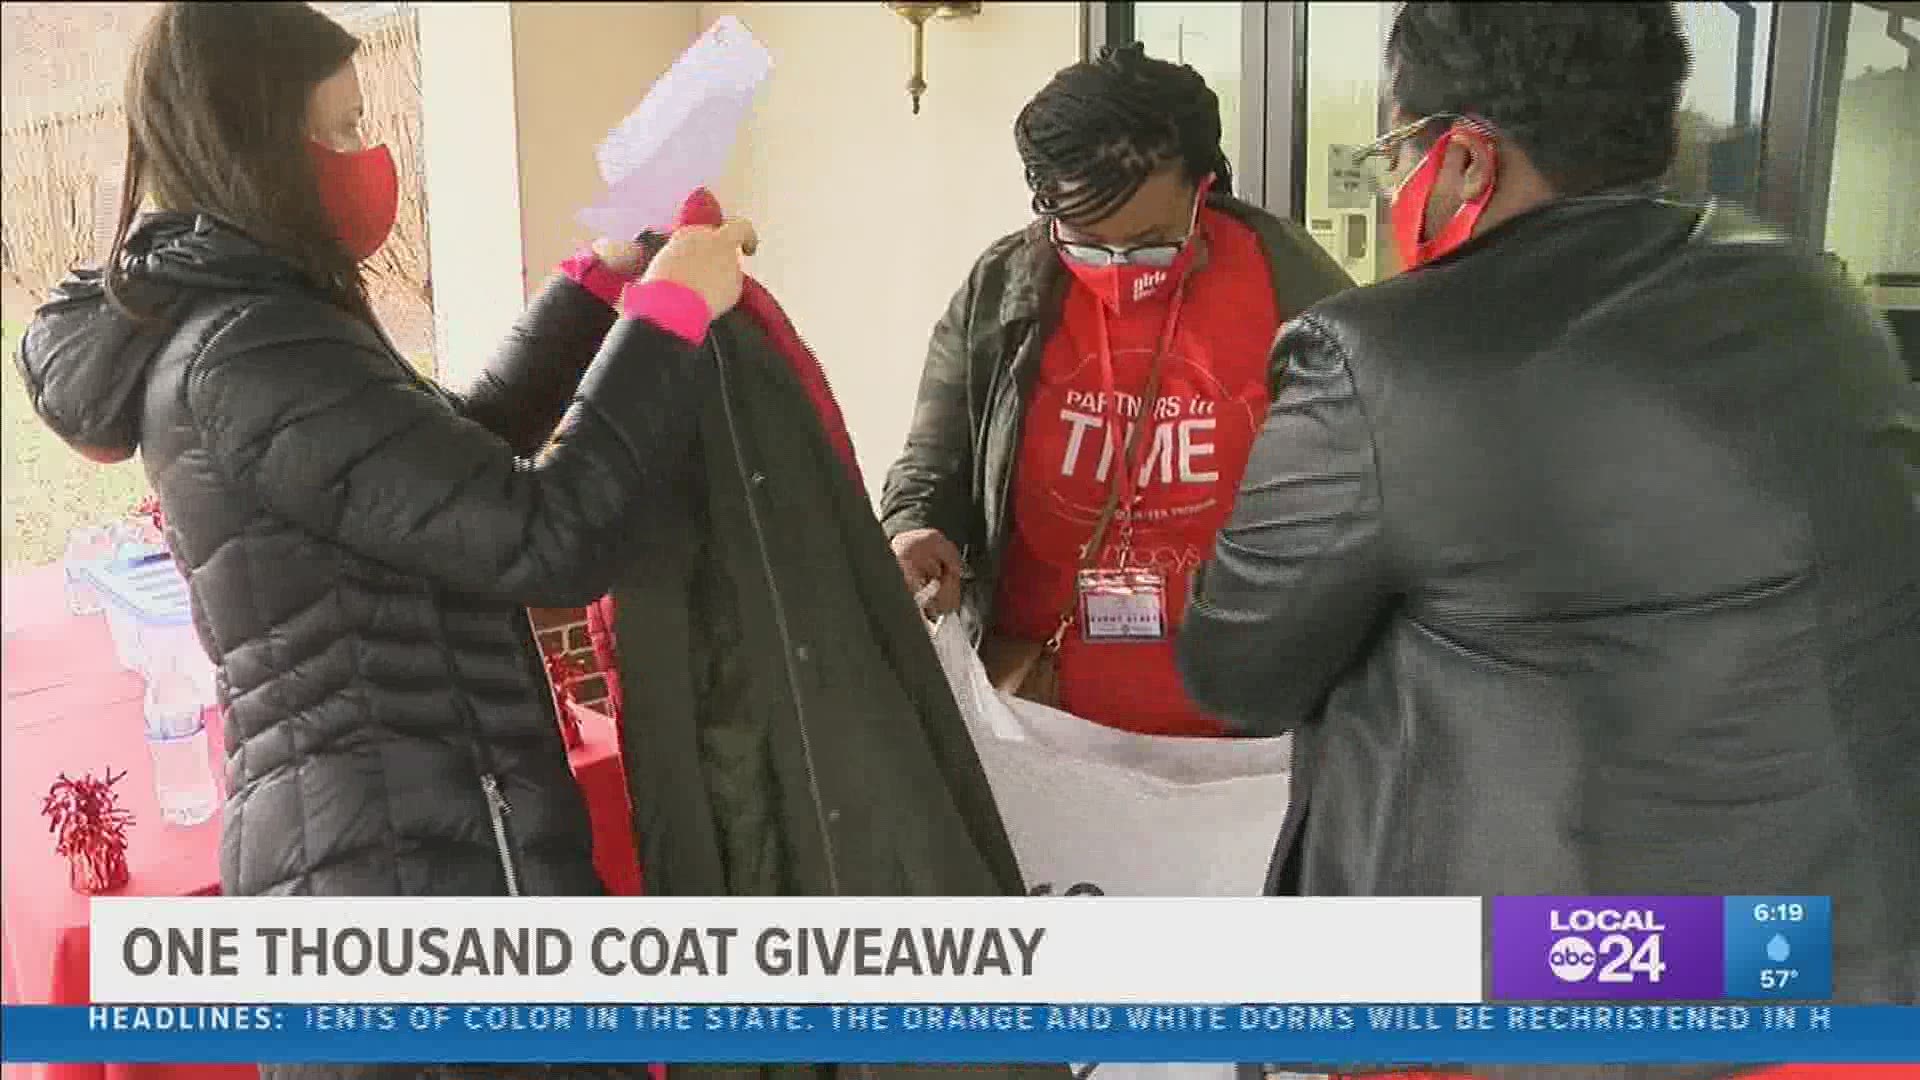 Macy's partnered with Clothes-4-Souls for a coat distribution event in Memphis